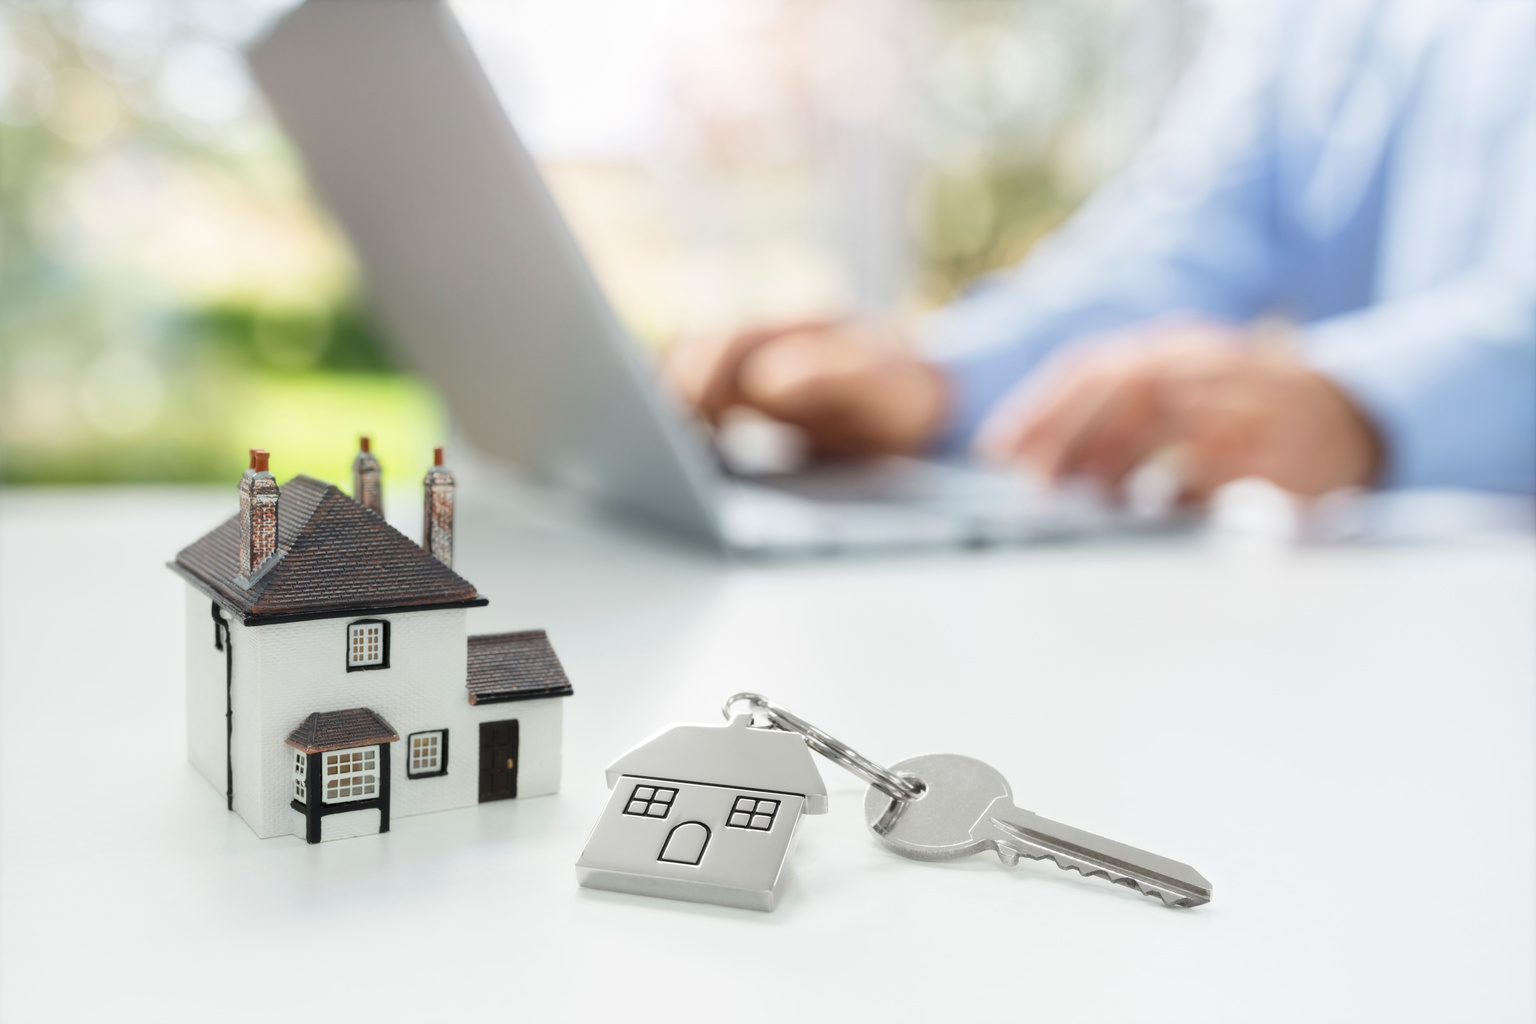 Managing and recording mortgage documents with iLienRED